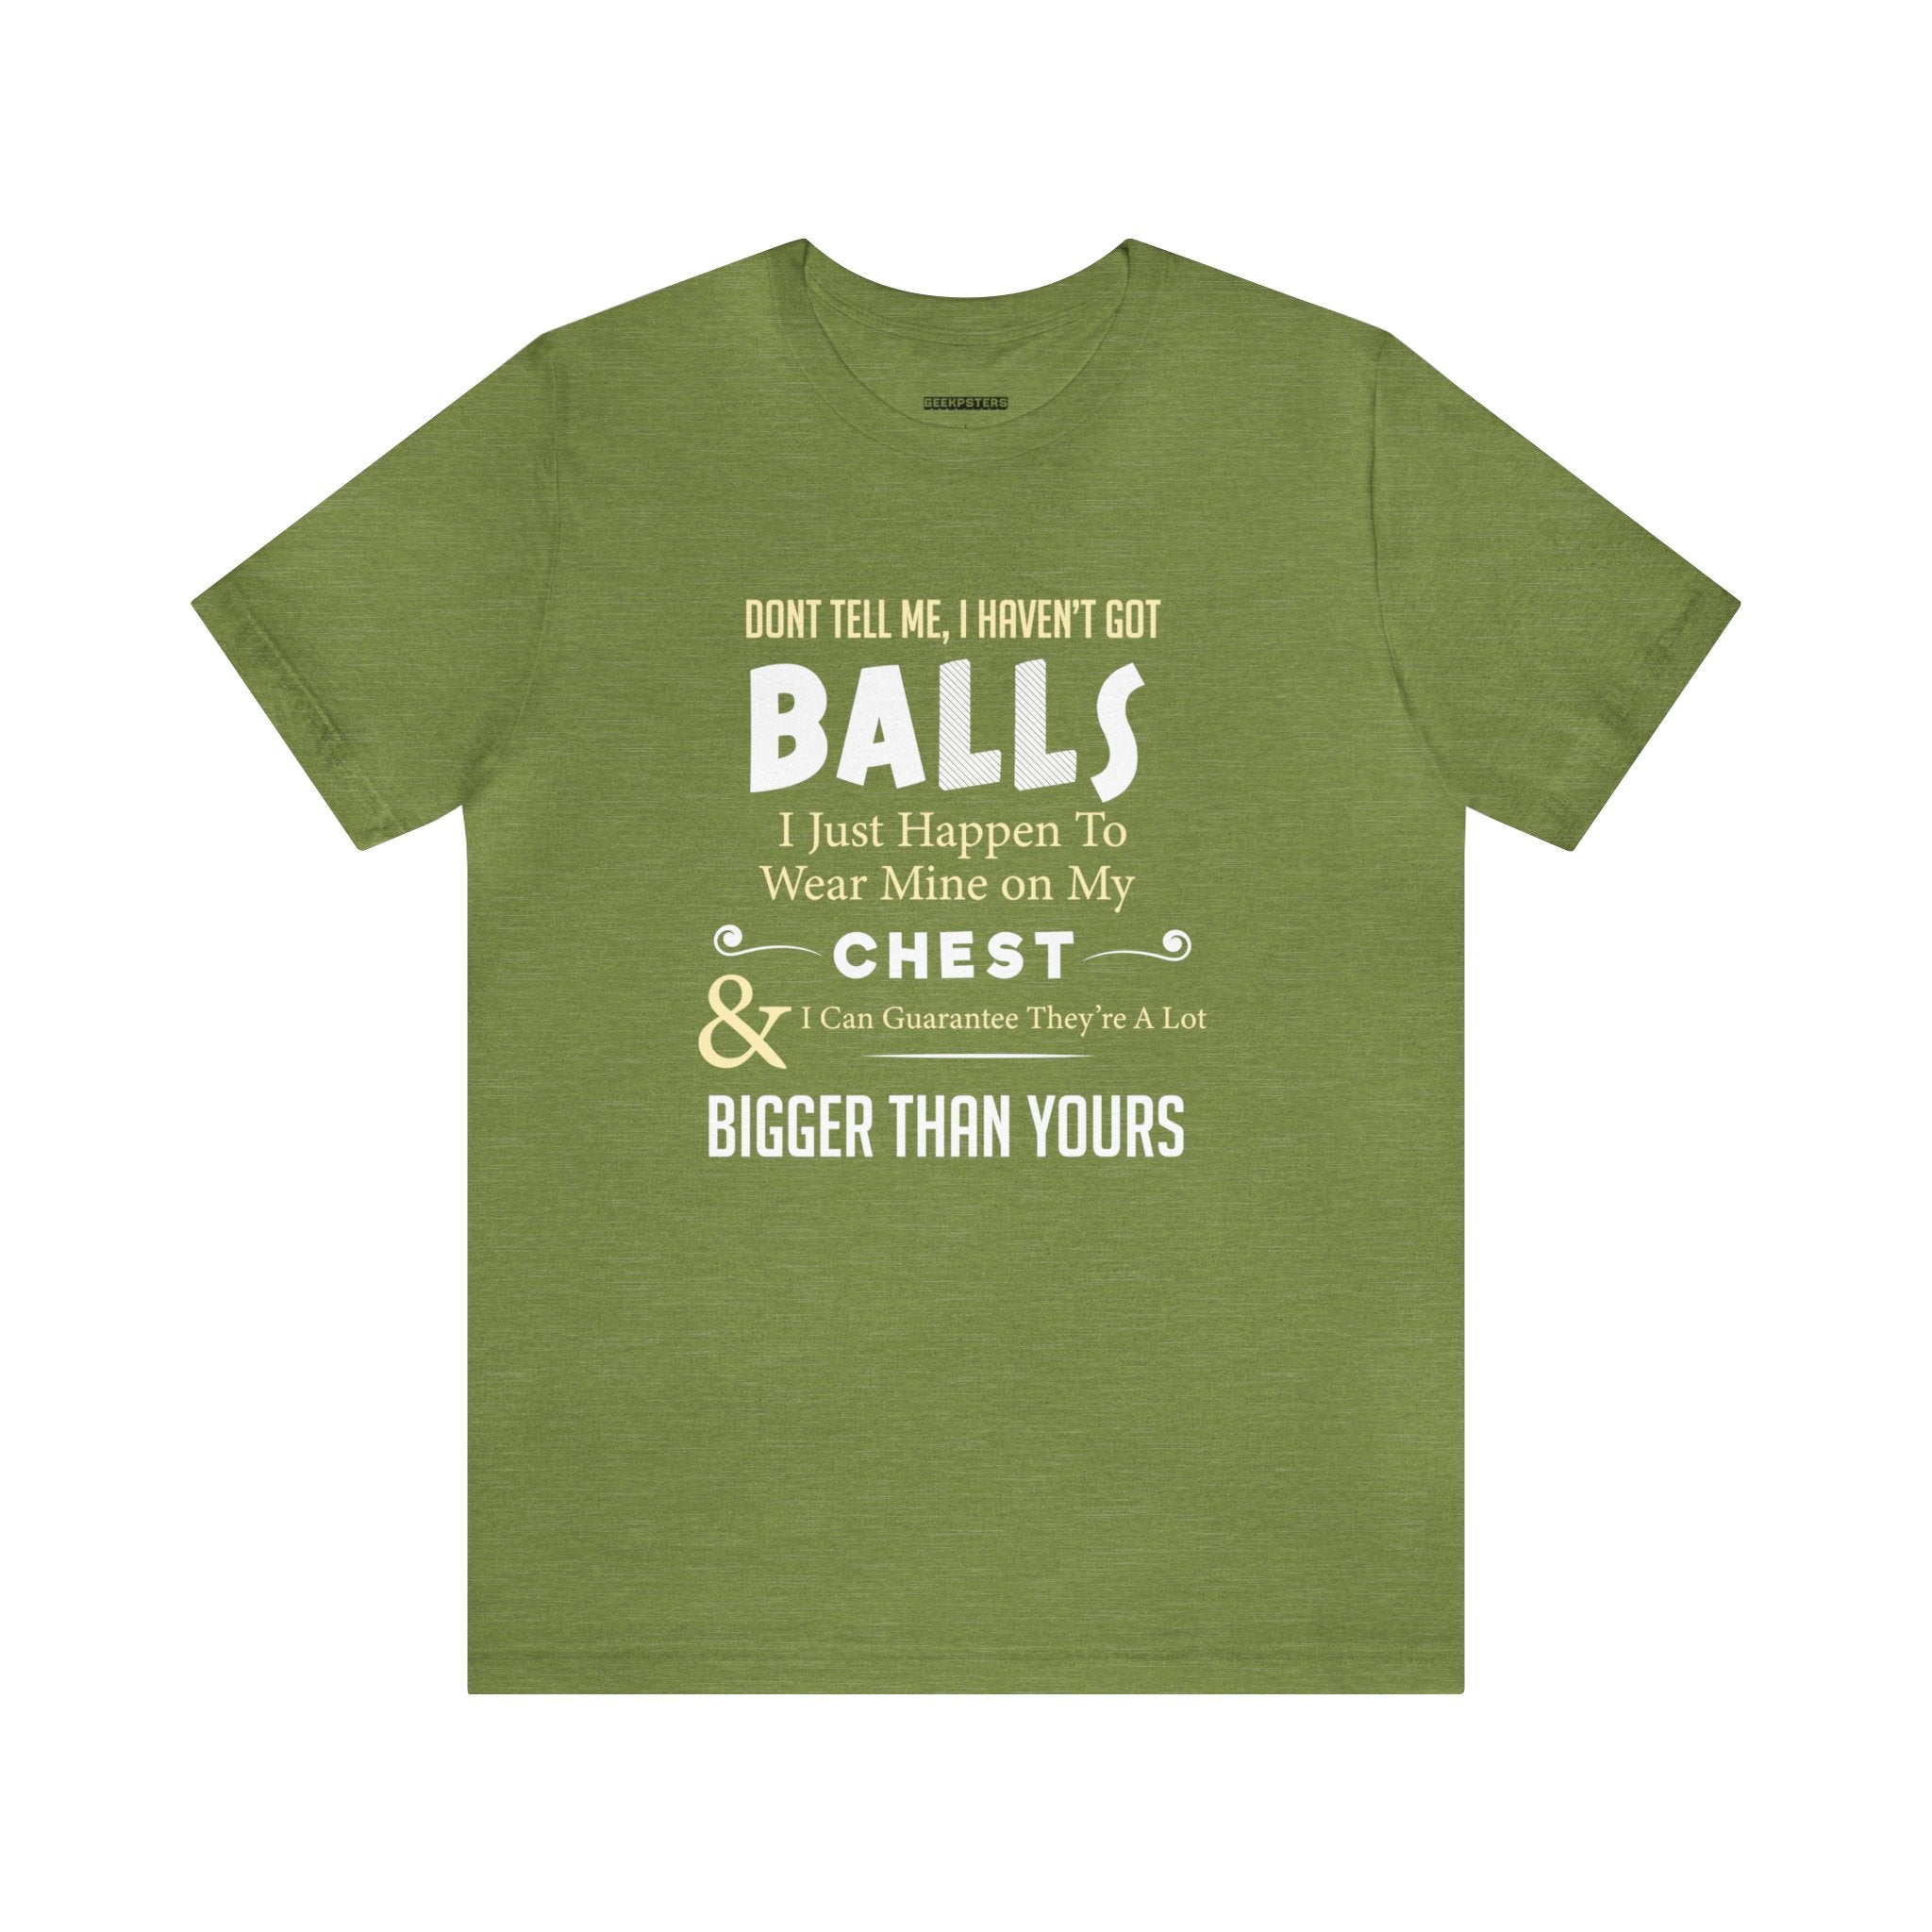 A green Bigger Than Yours T-shirt that makes the ultimate statement with the bold fashion statement printed on it.